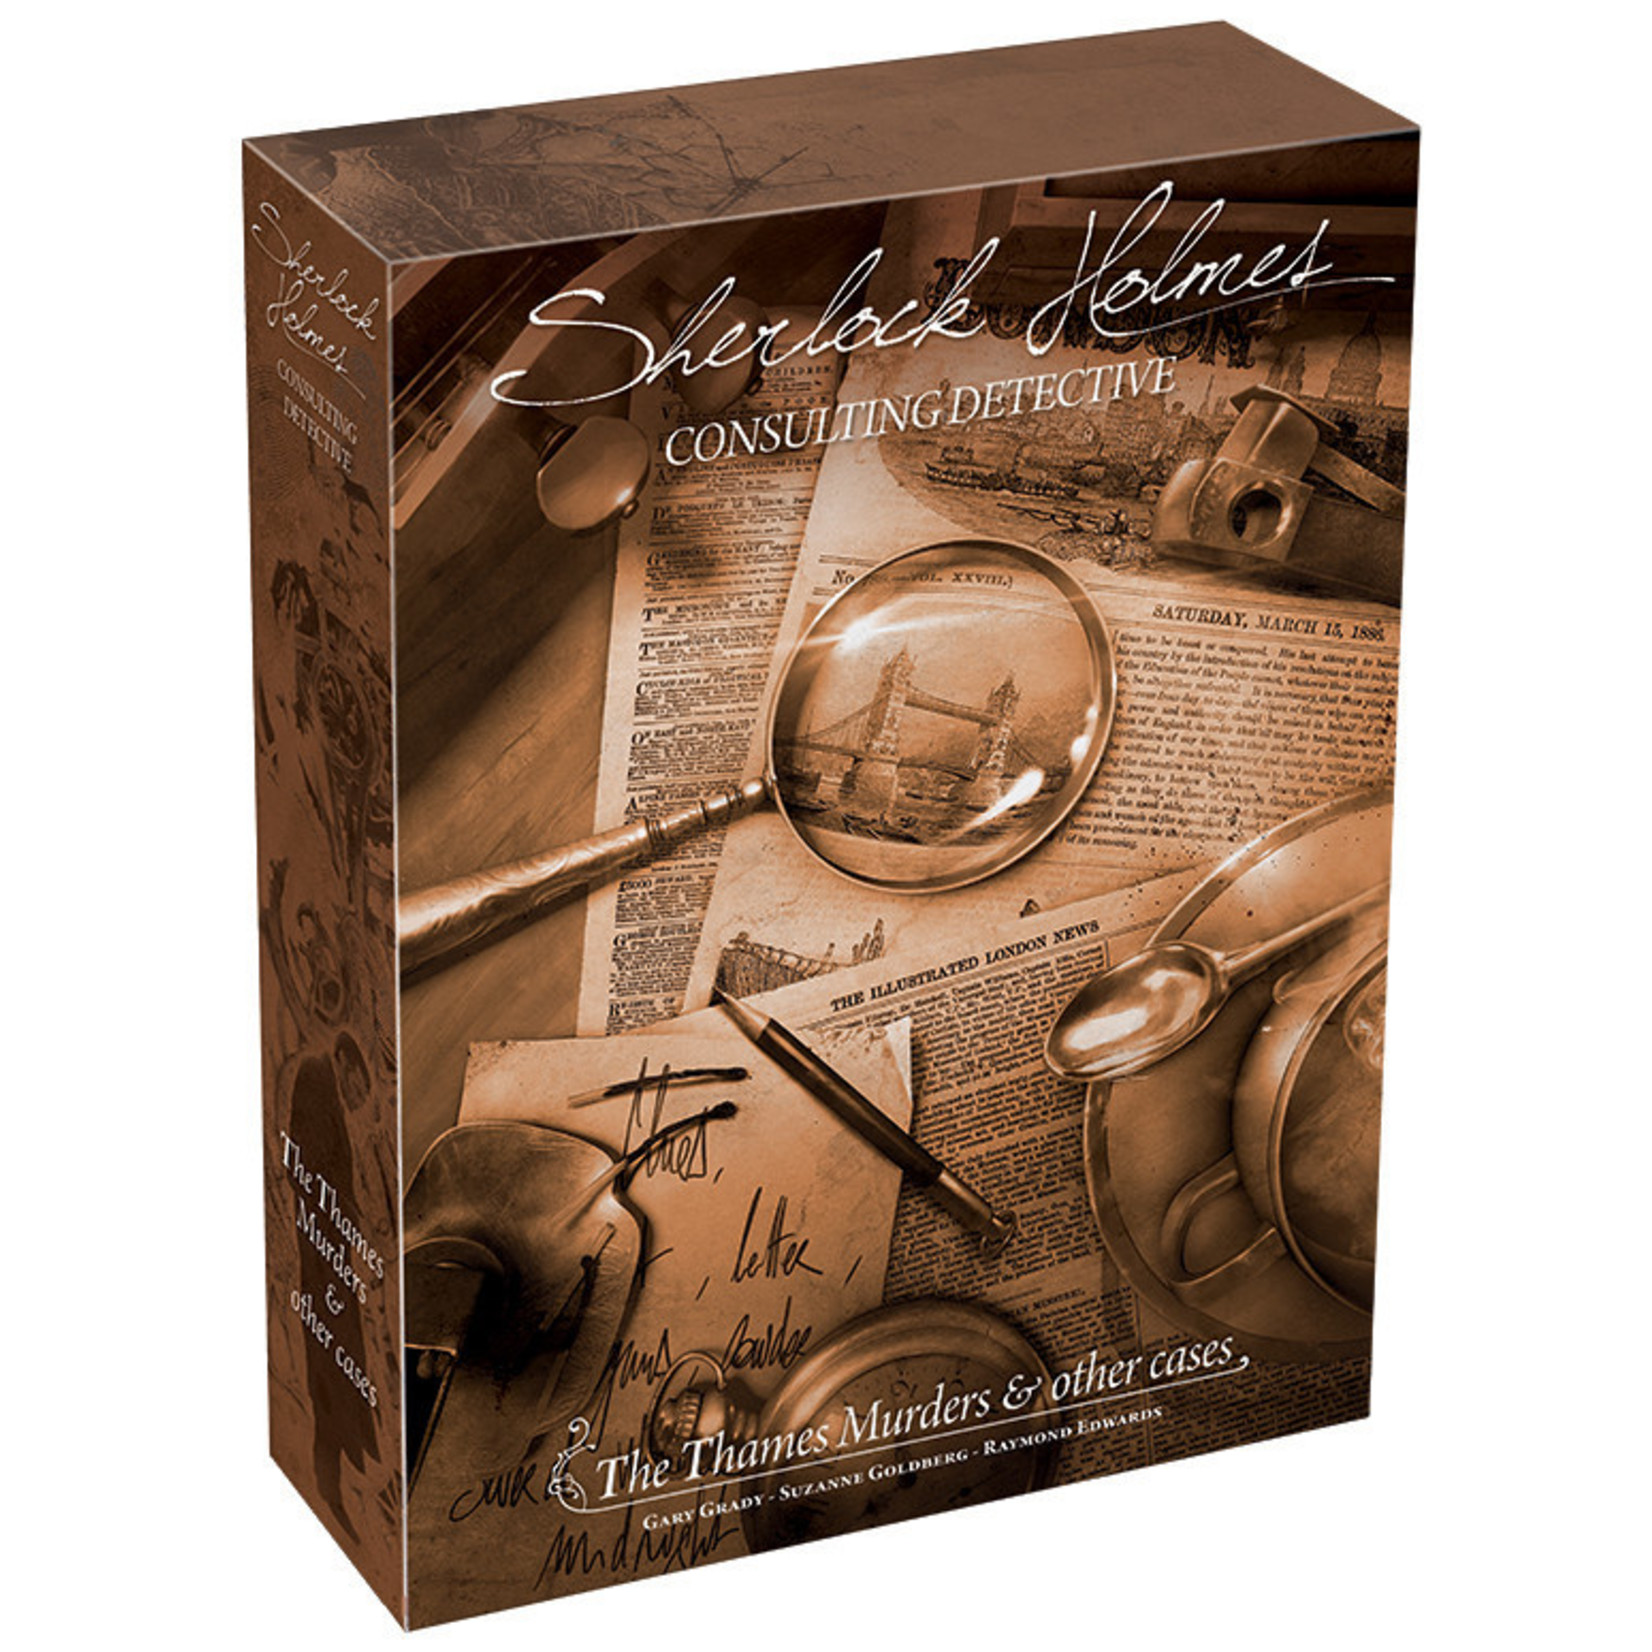 Space Cowboys Sherlock Holmes Consulting Detective: The Thames Murders & other cases